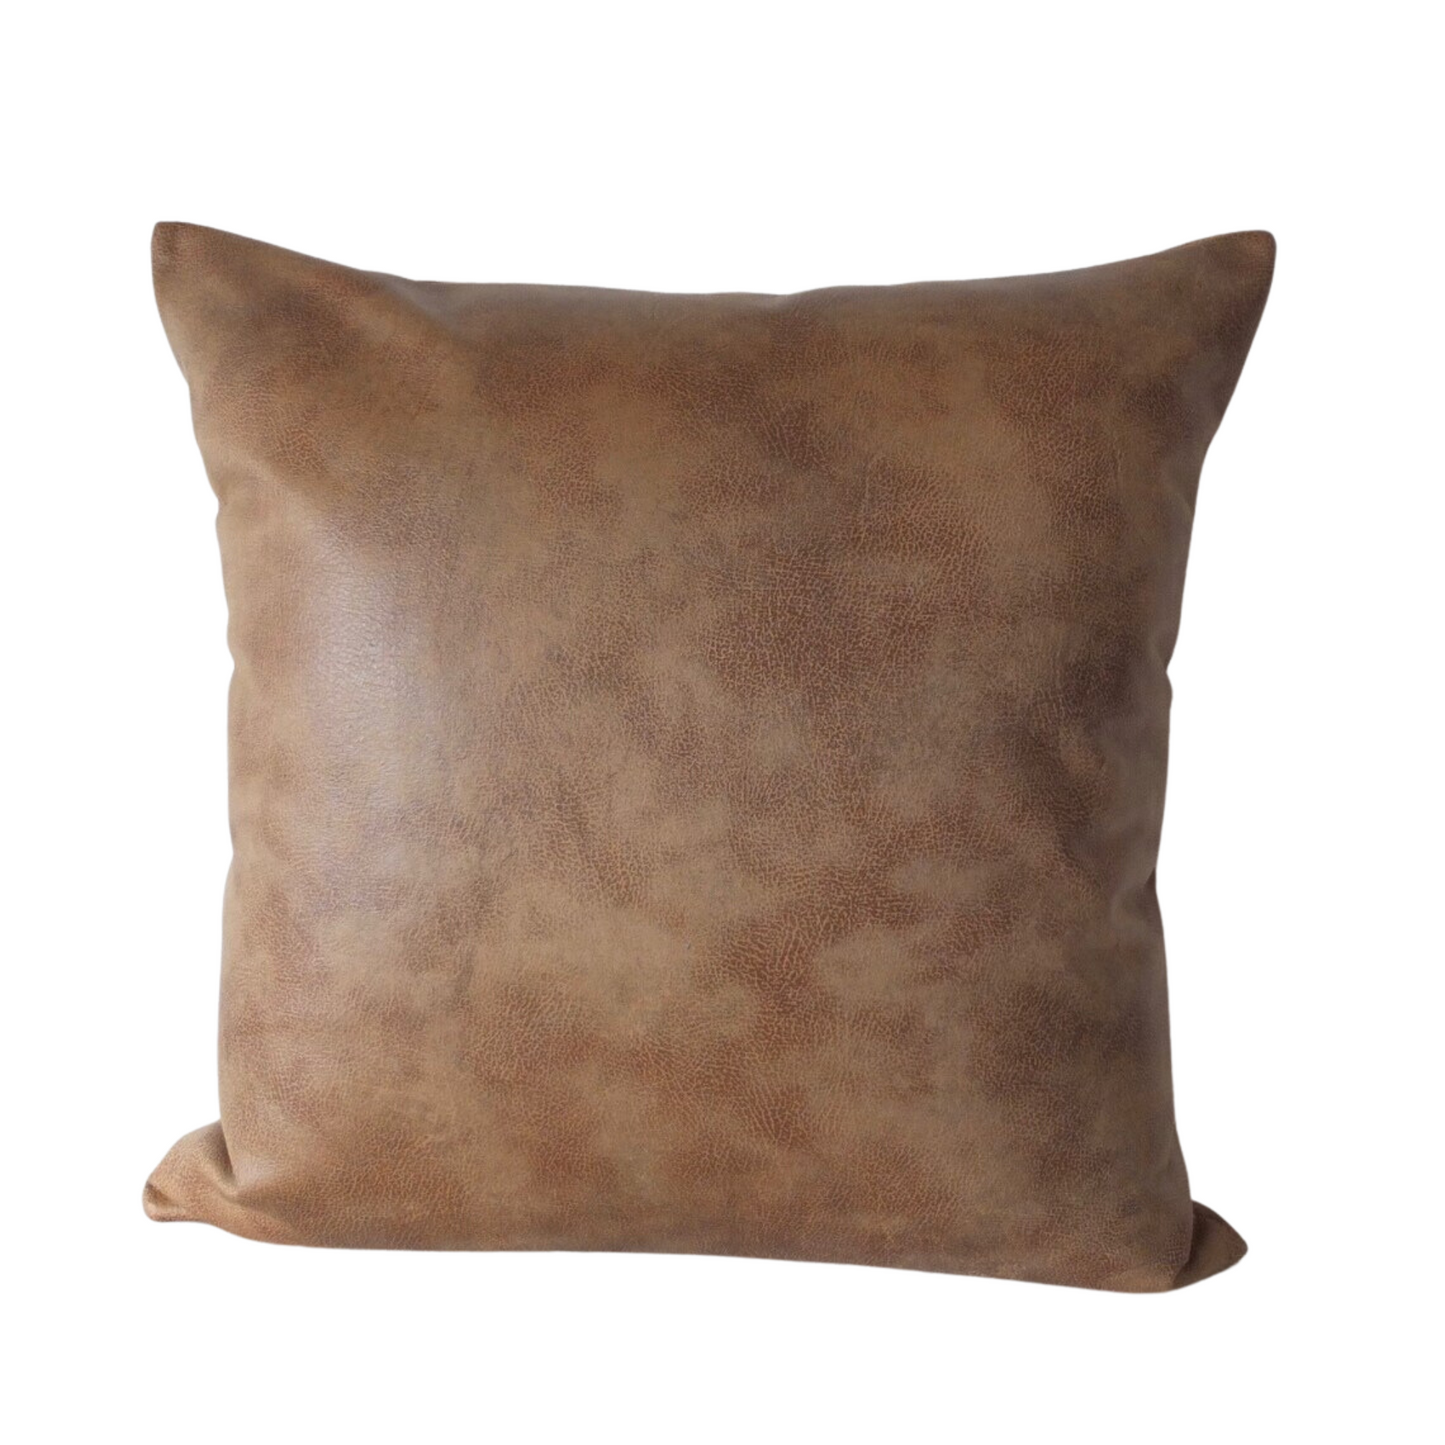 Modern West Texas Faux Leather Bolster Pillow Cover in Vintage Tan - Available in Lumbar, Throw, Bolster, Euro Sham Sizes